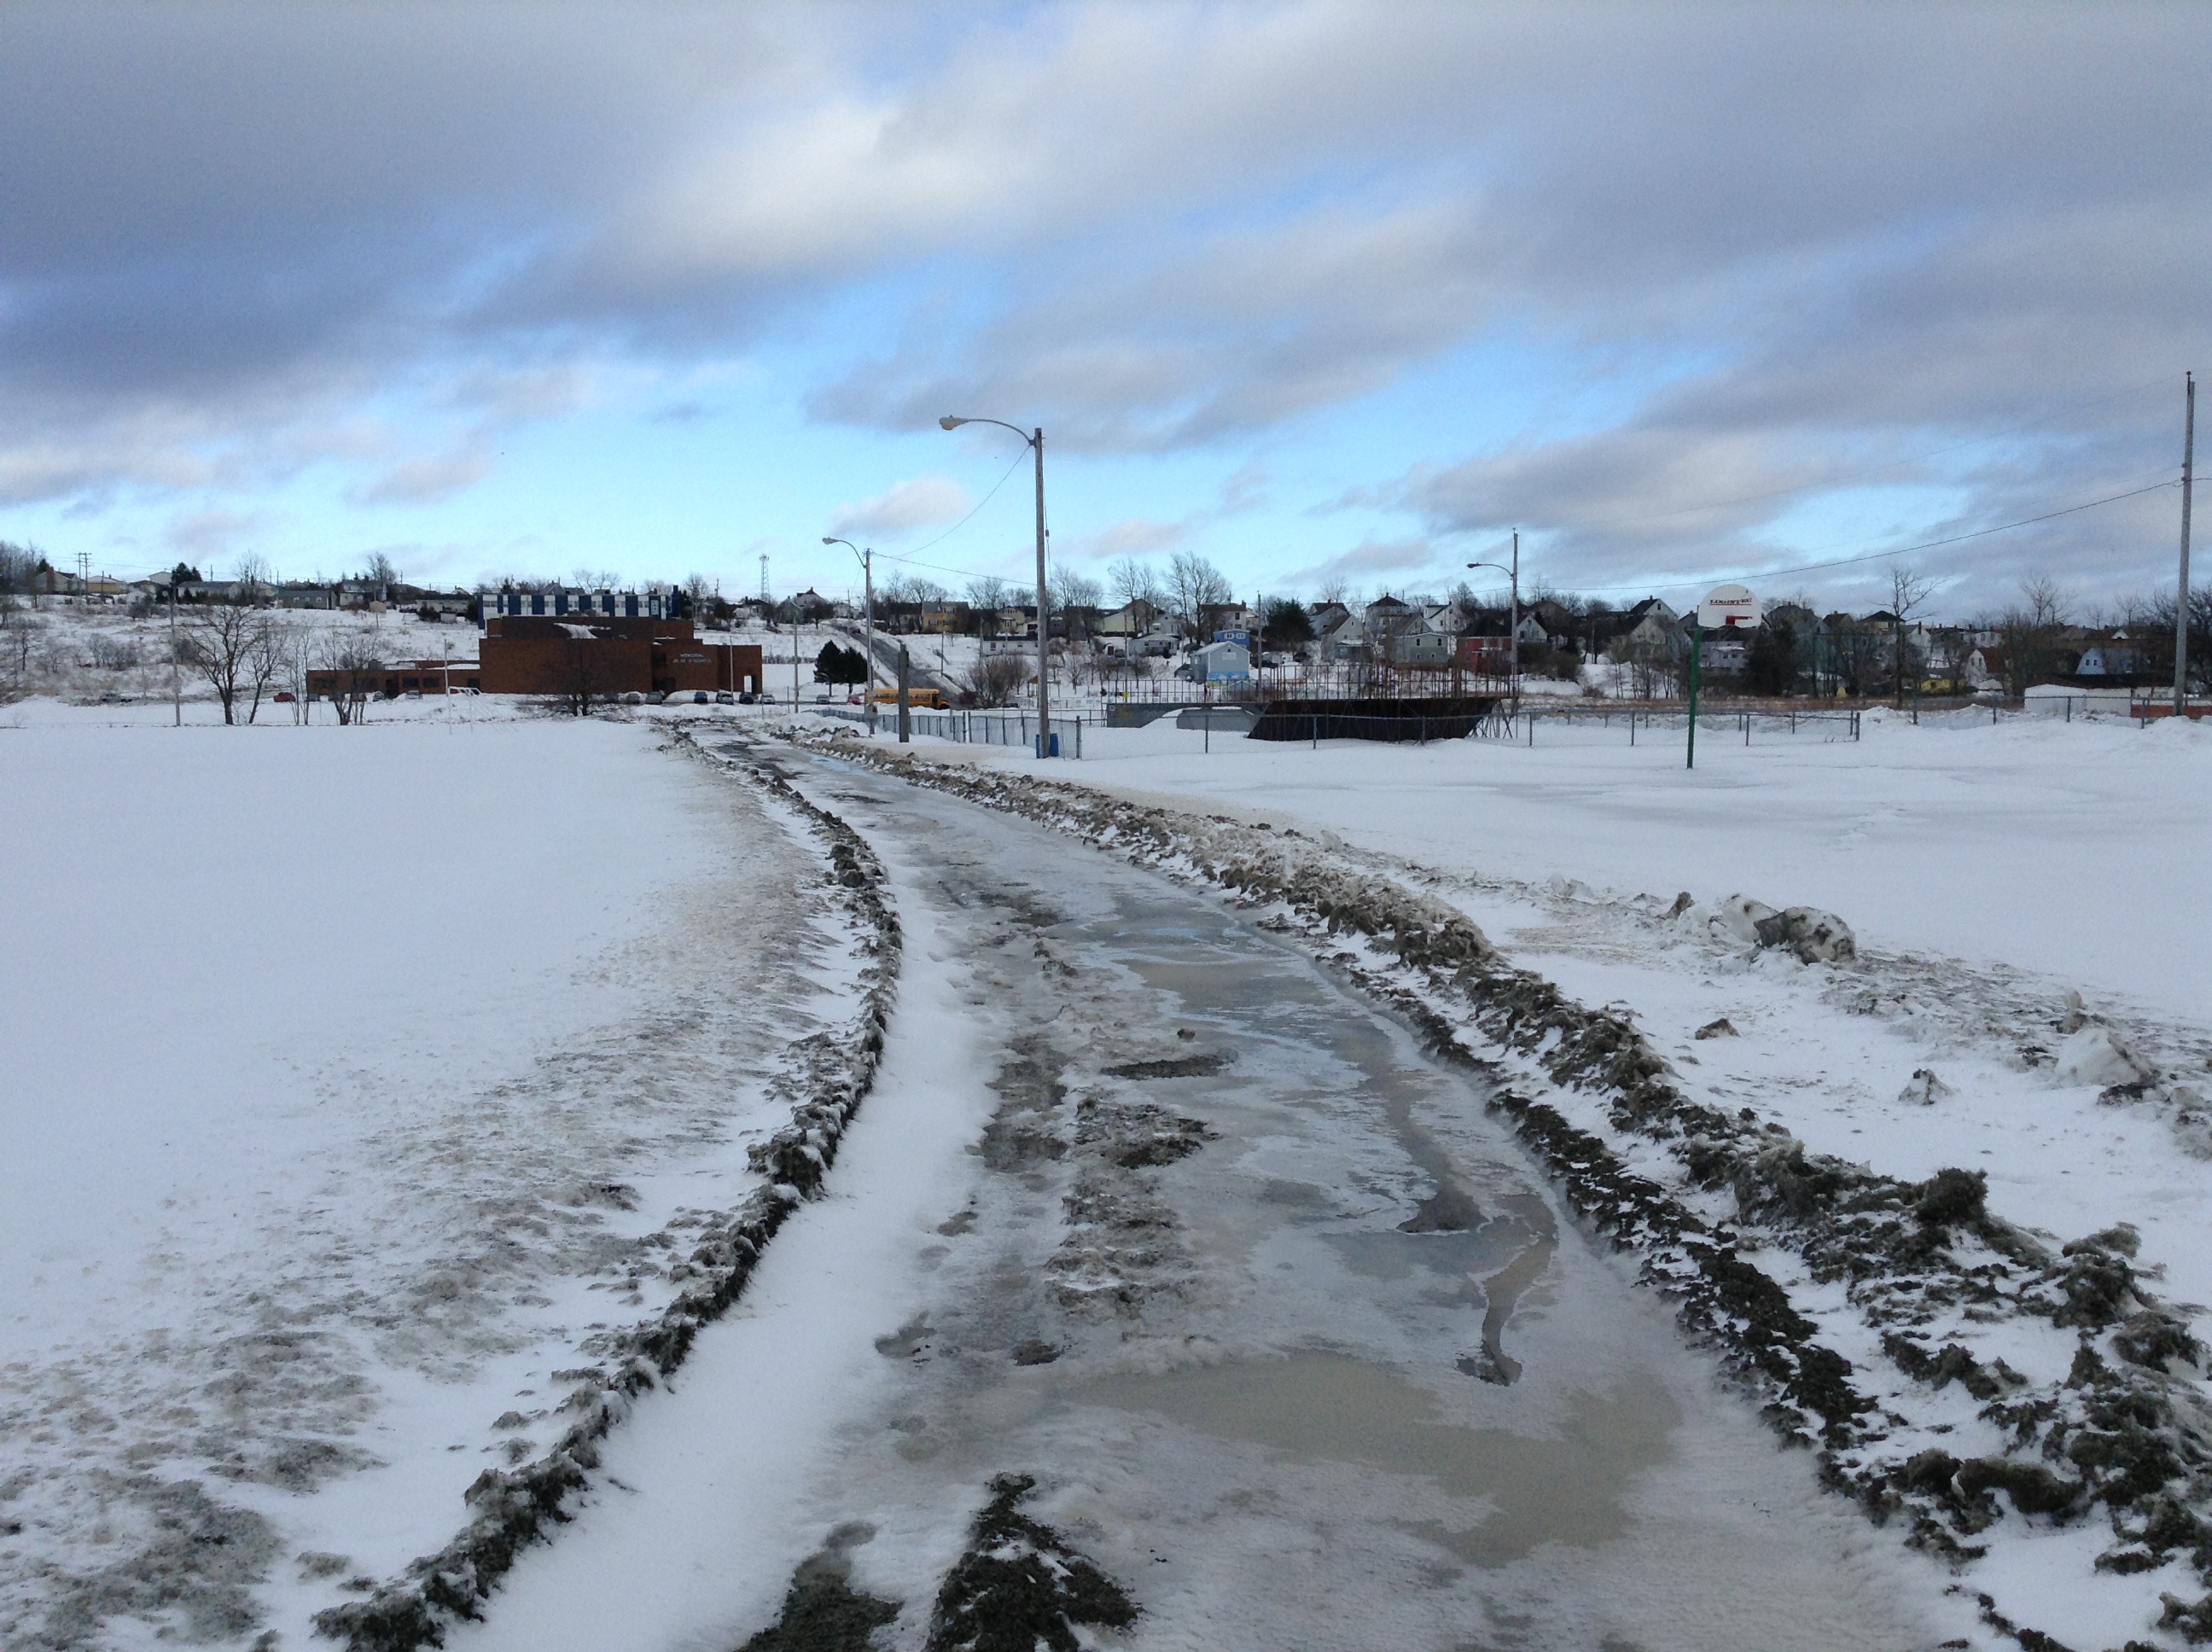 Walking Track is full of mud and ice at the Neville Park in Whitney Pier during the Winter.